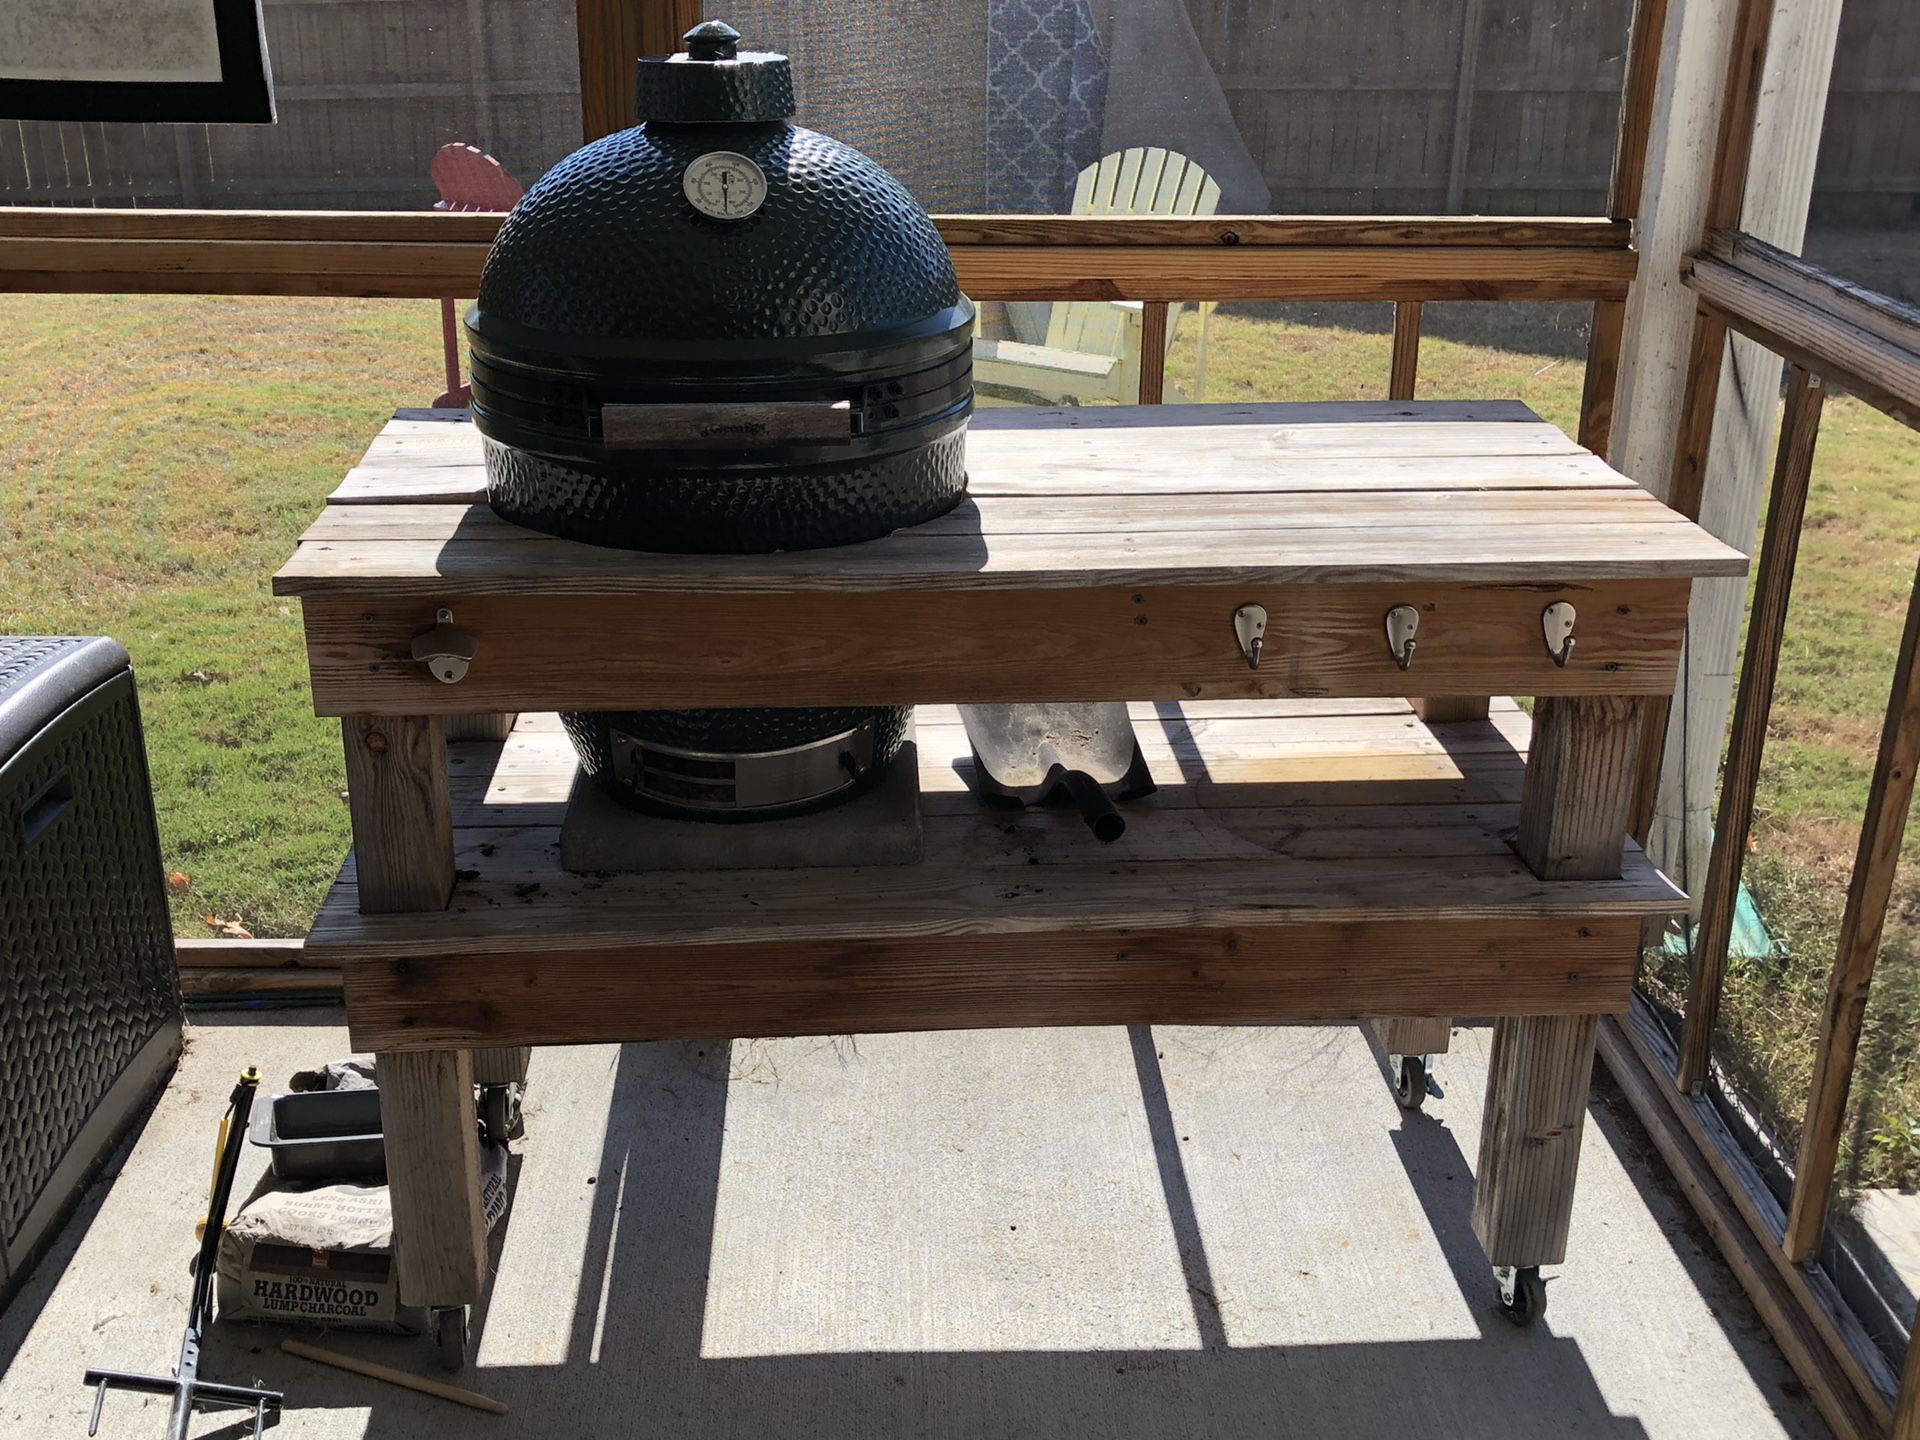 Big Green Egg Table (Egg not included)